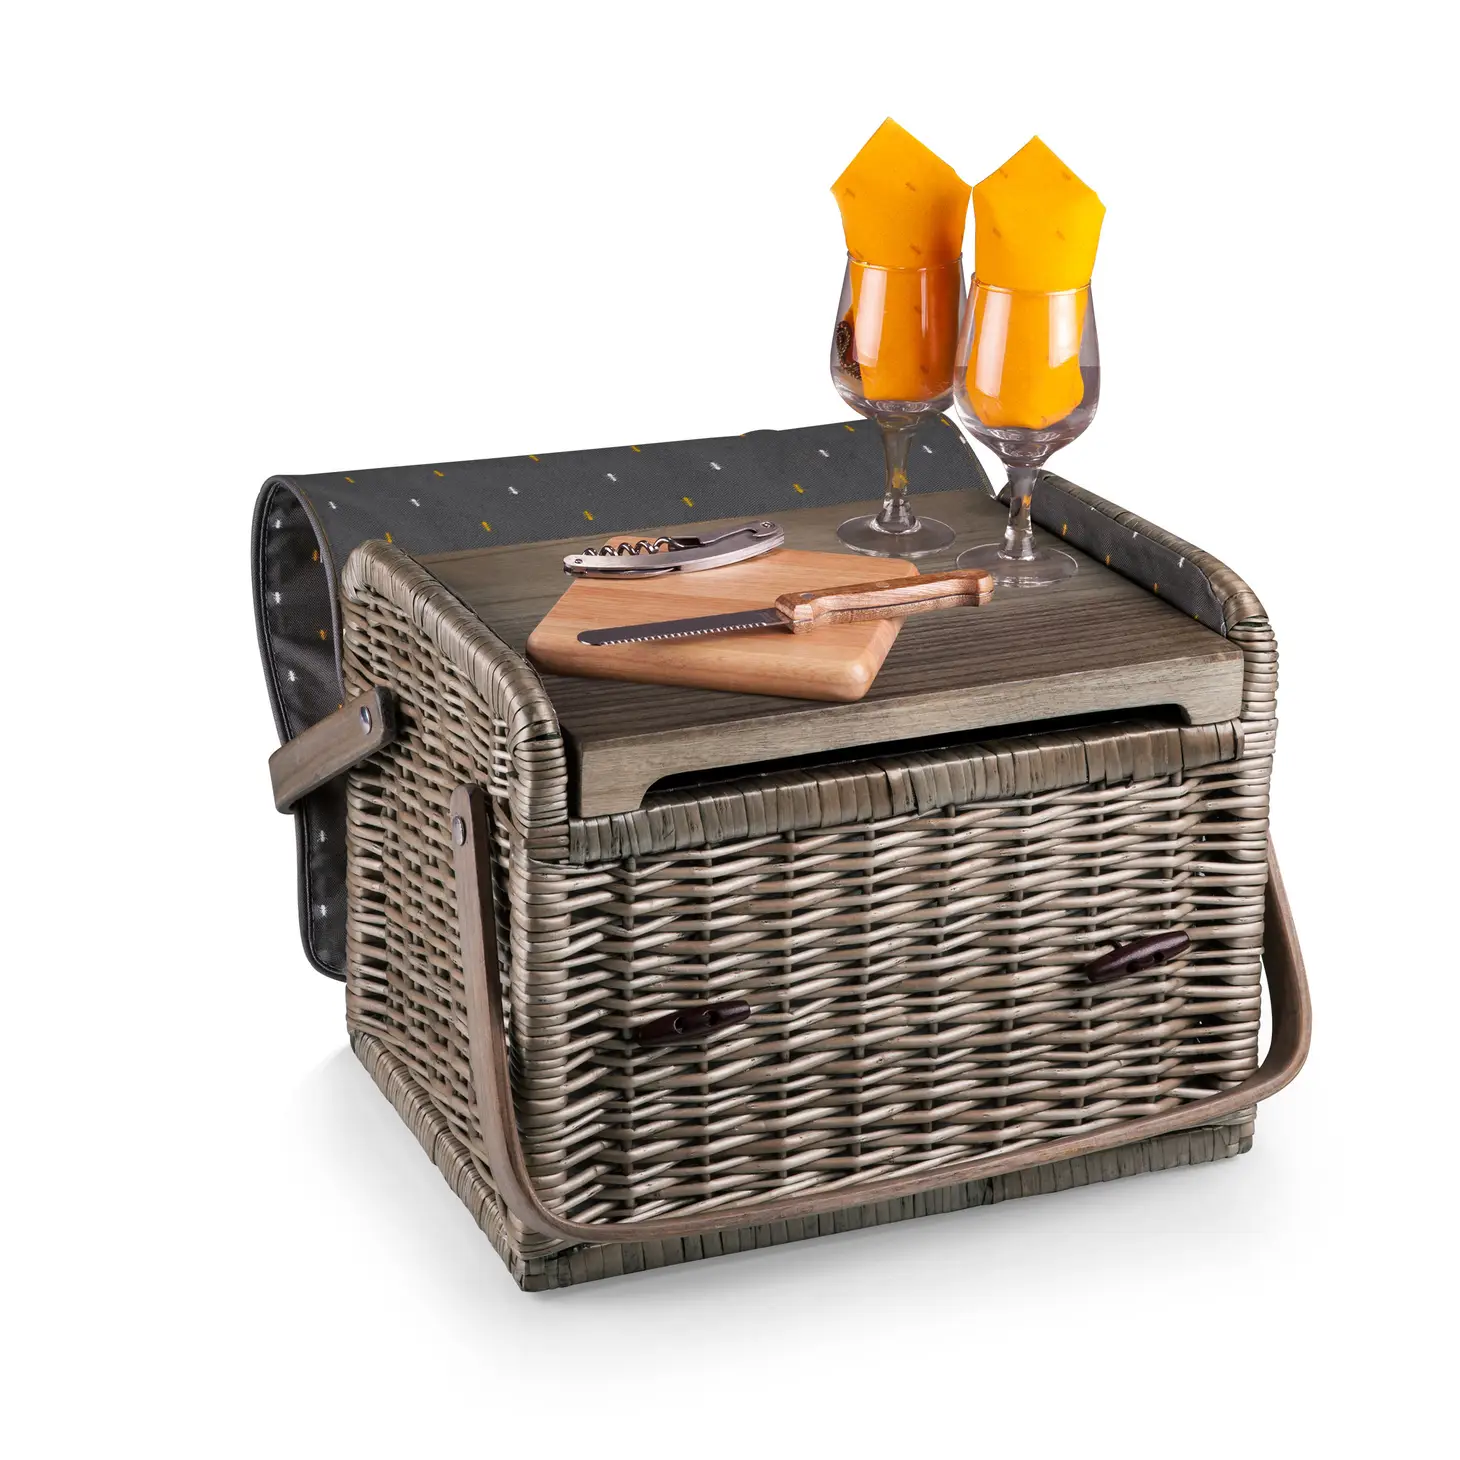 Kabrio Wine & Cheese Picnic Basket - Core staged